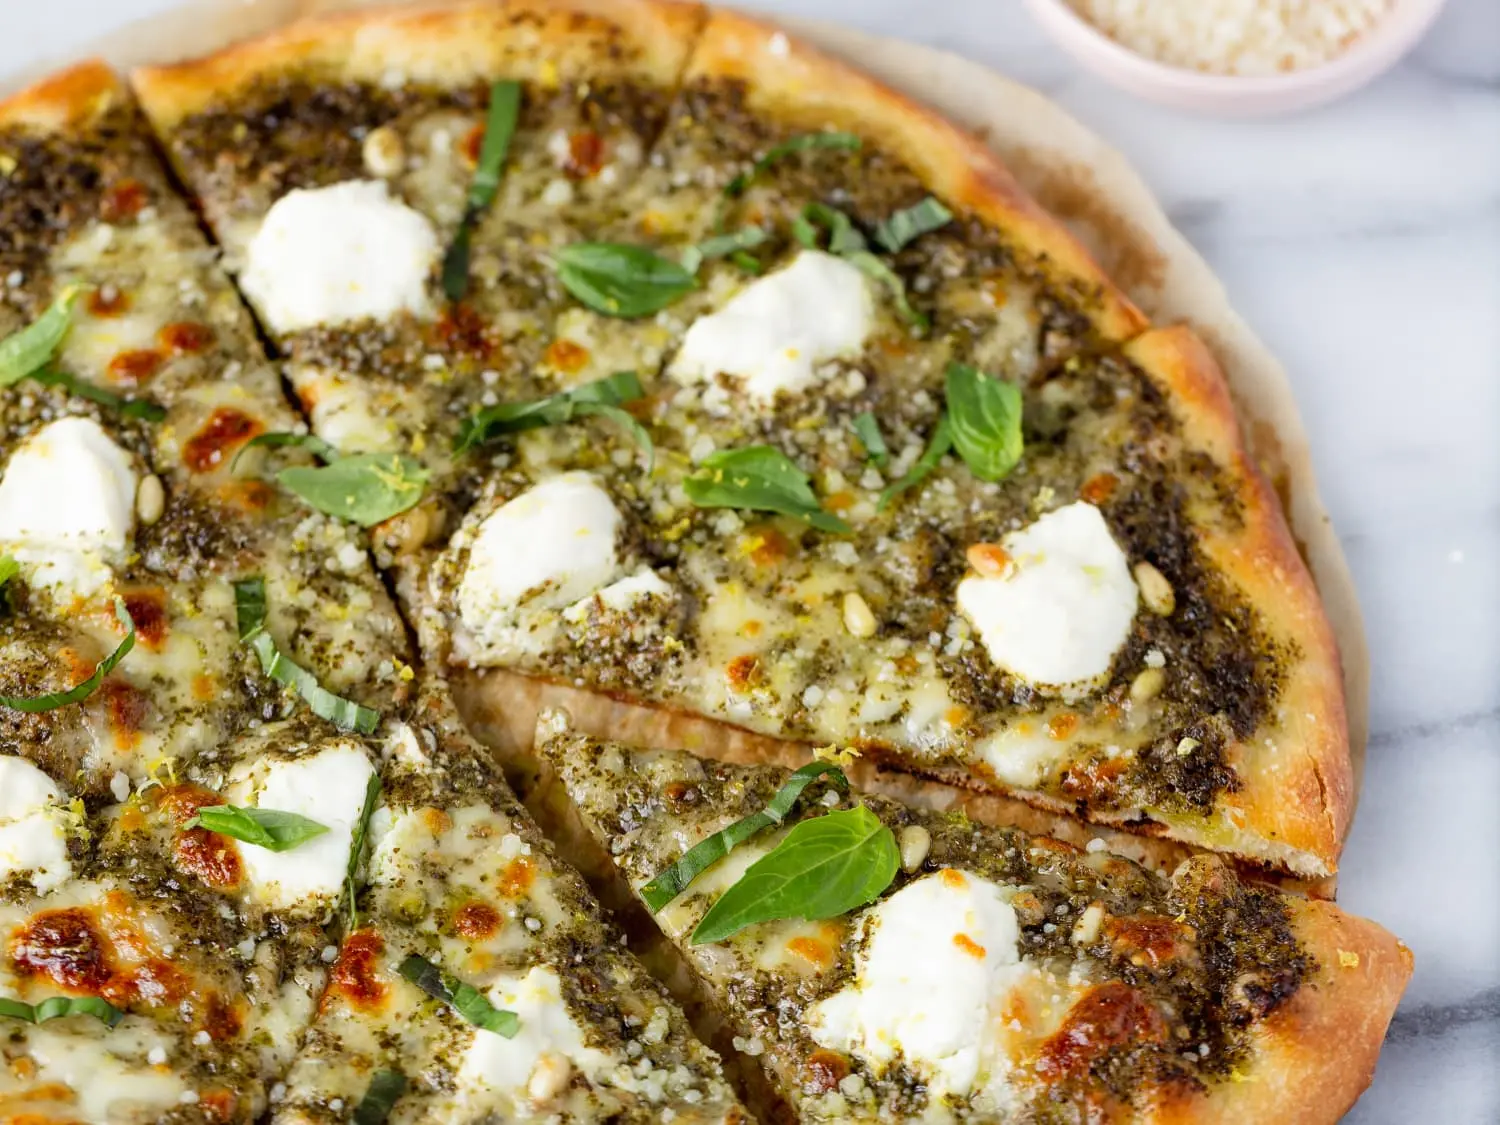 pizza with pesto sauce - What is the name of the pesto pizza